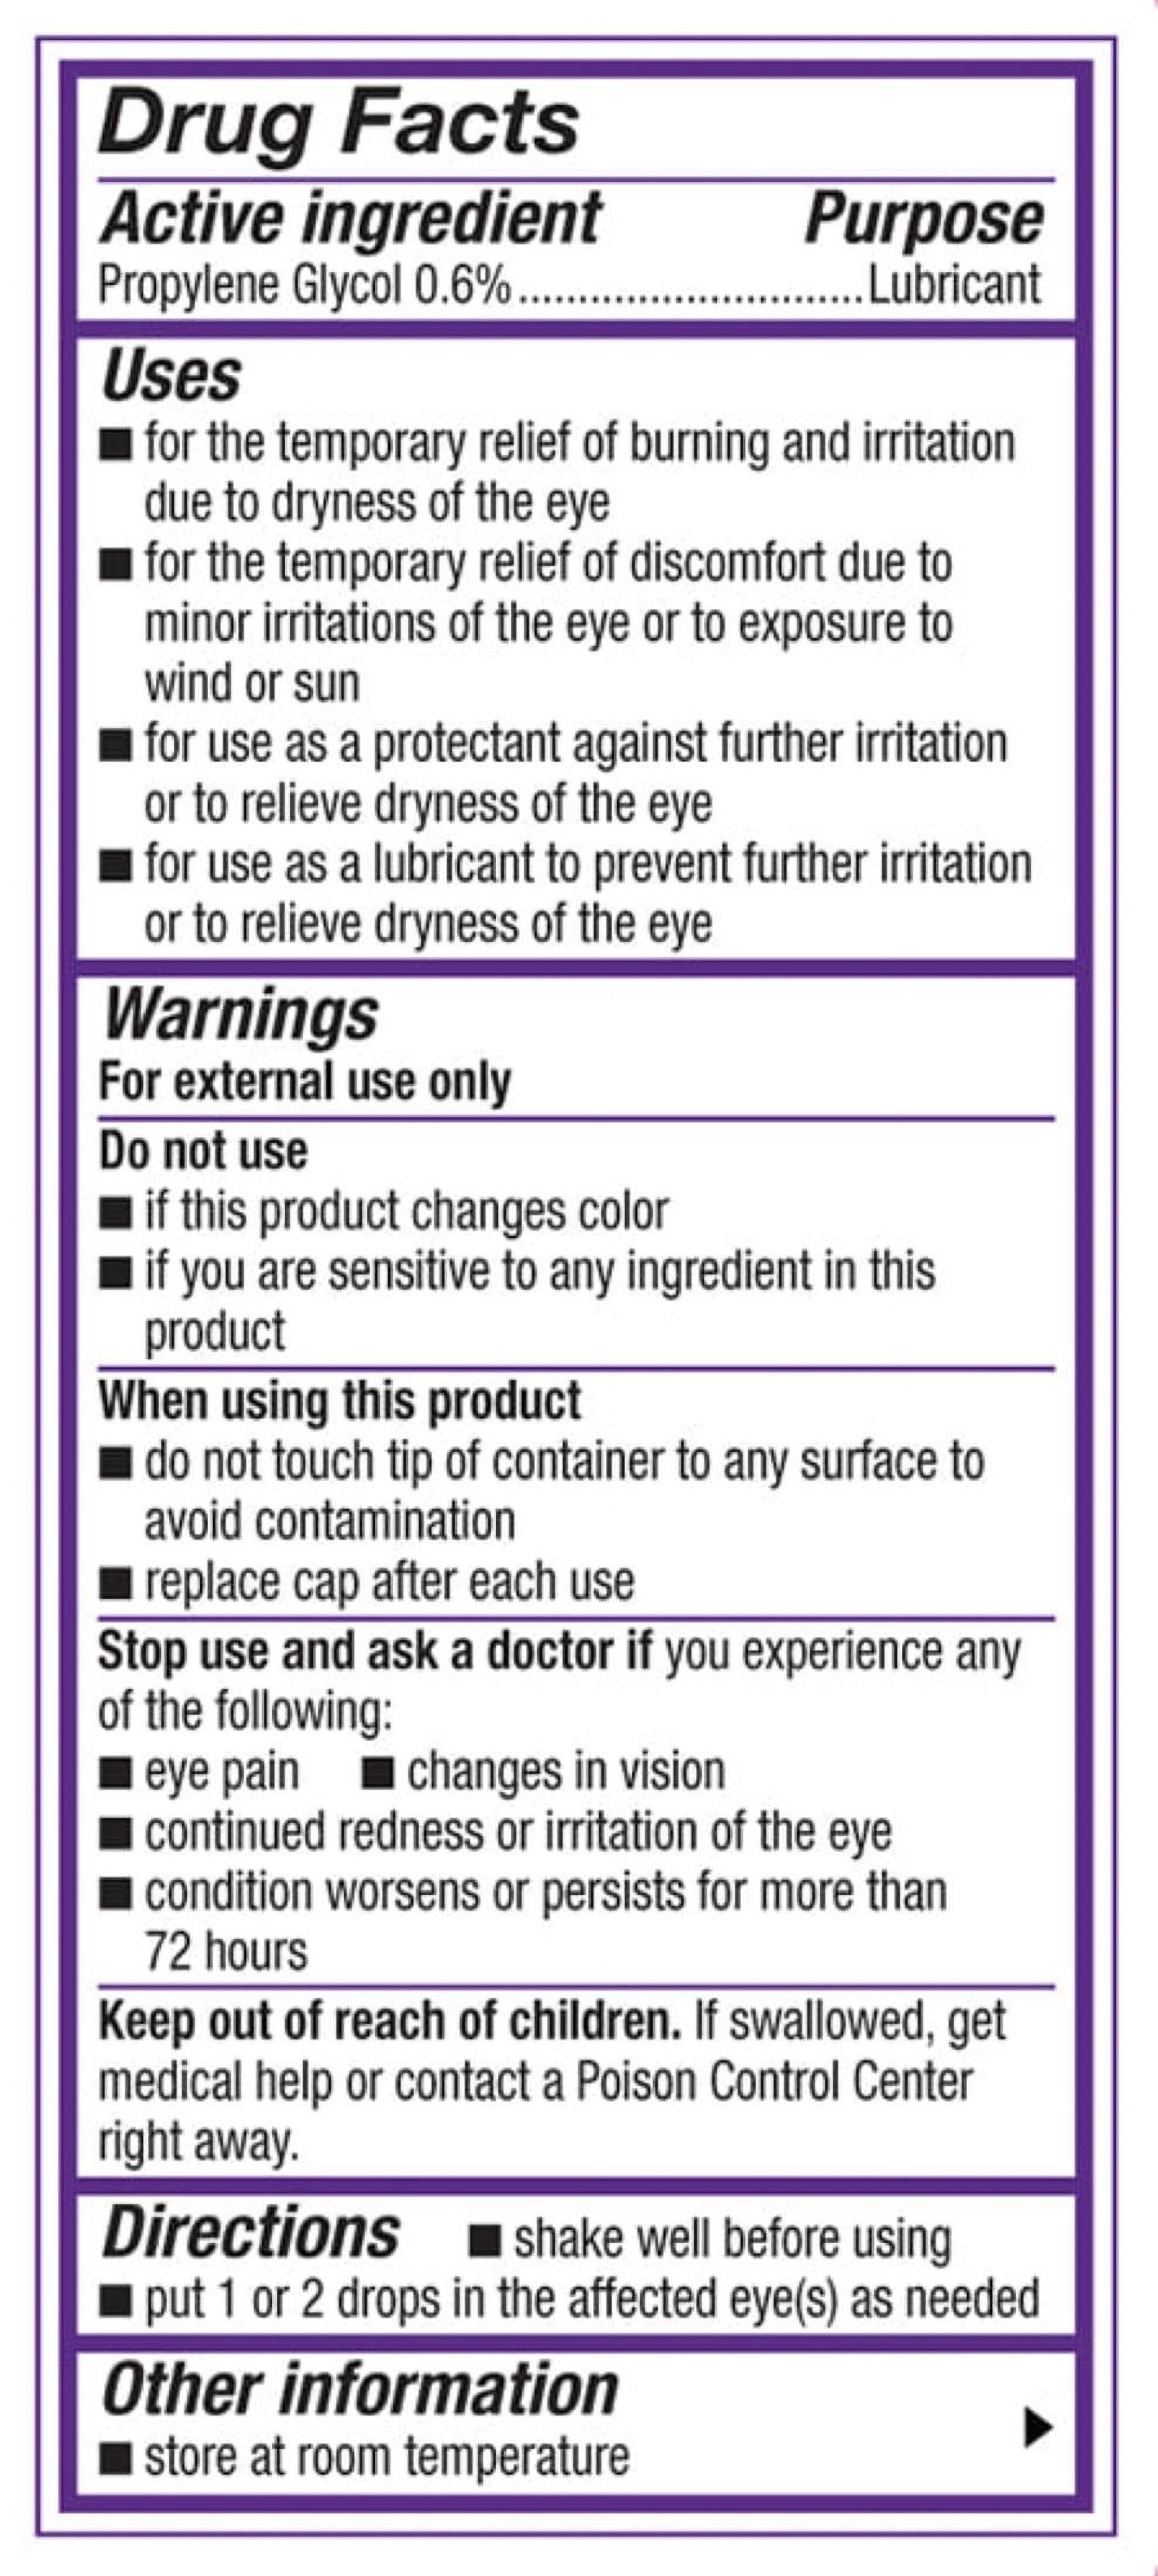 Systane Complete Dry Eye Care Symptom Relief Eye Drops, 10 ml - image 5 of 8